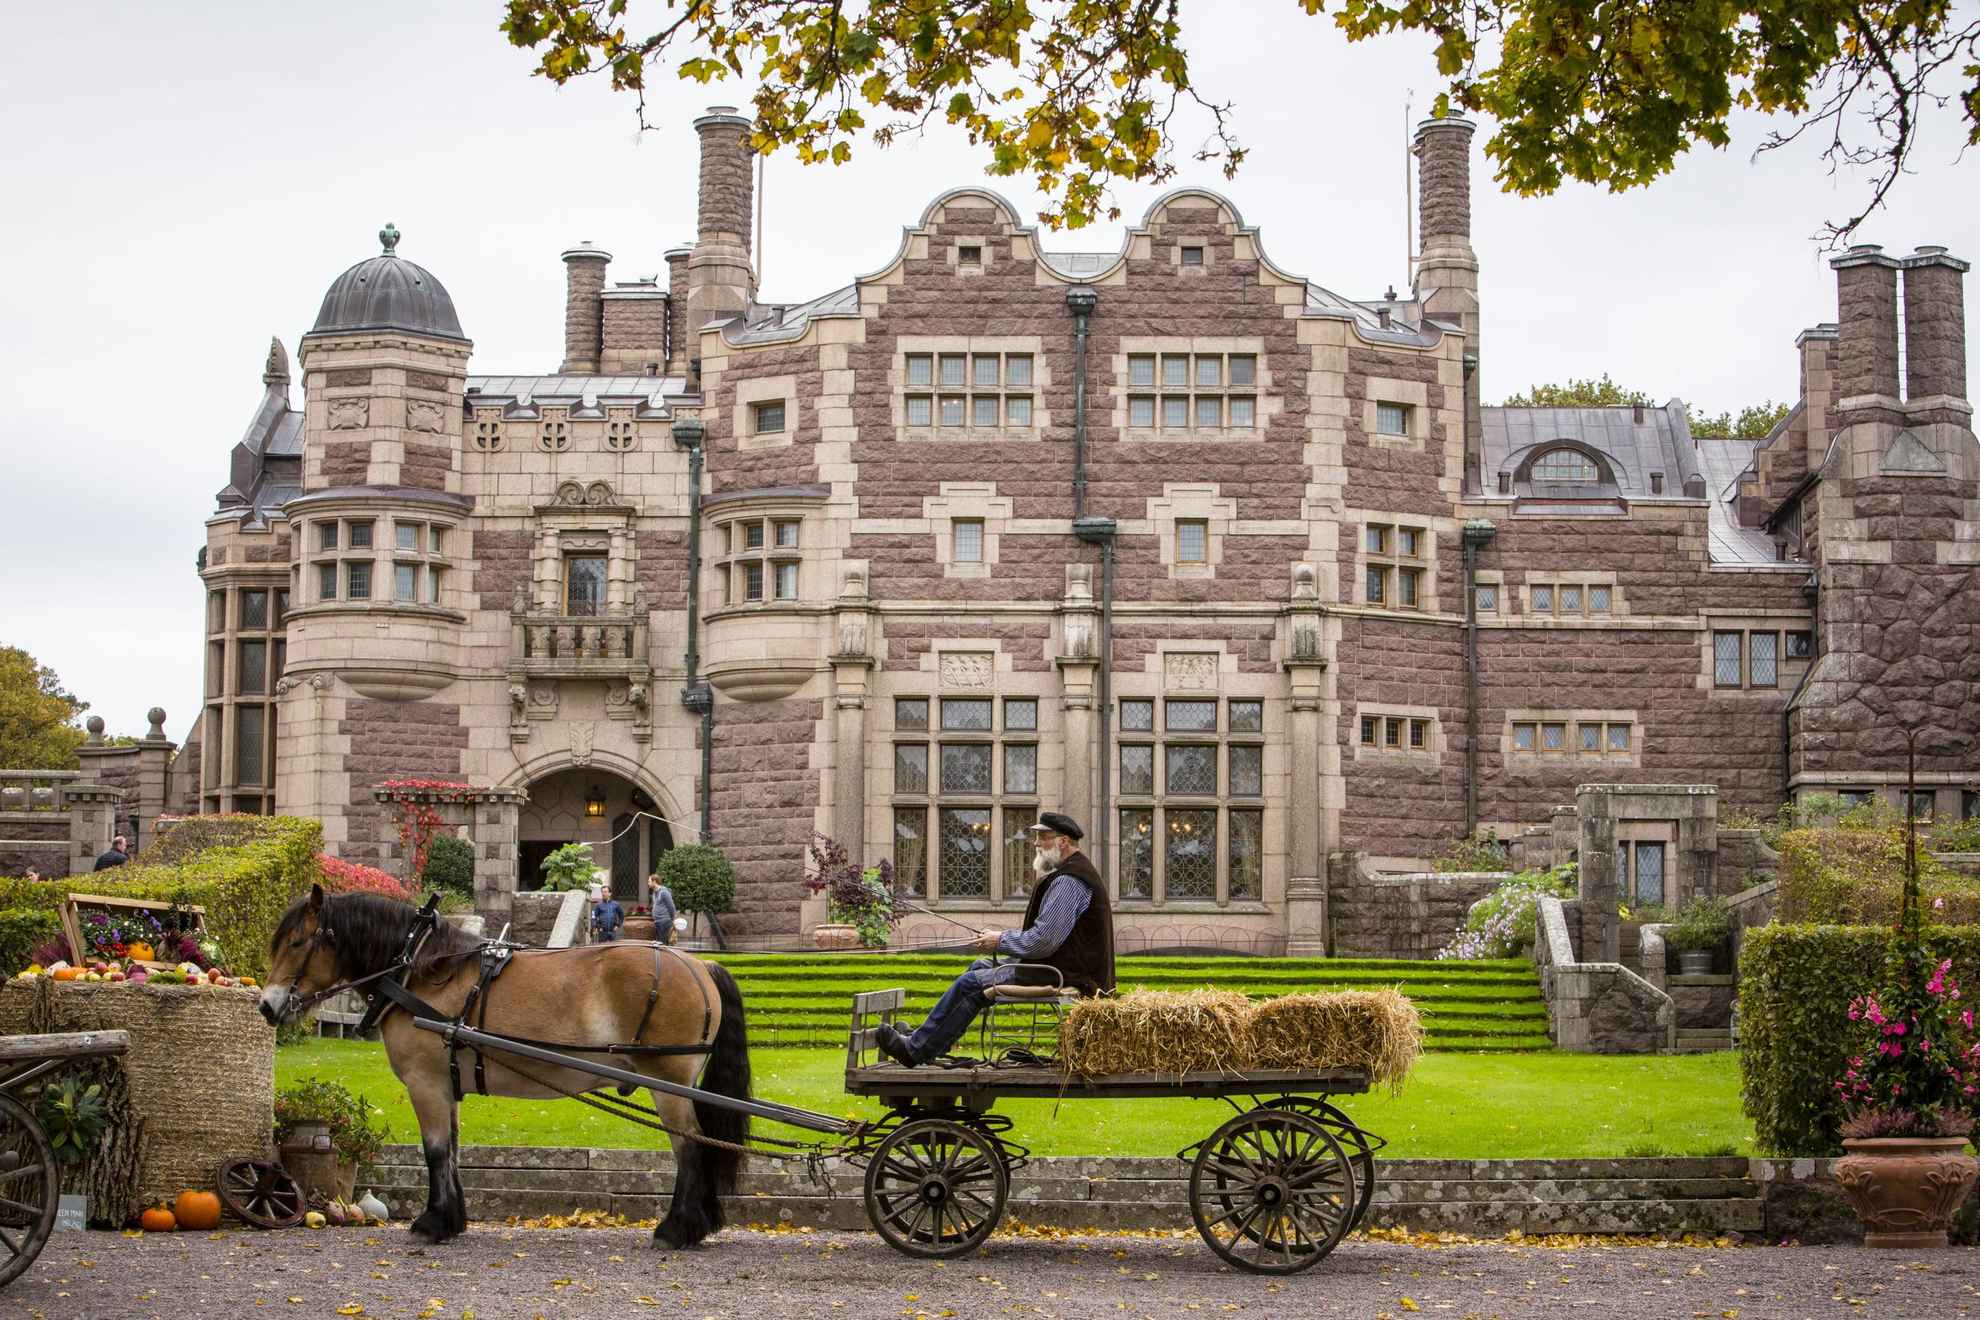 An elderly man is driving a horse and carriage with a couple of hay bales. They stand in front of a castle and beside you see a market stall with vegetables.